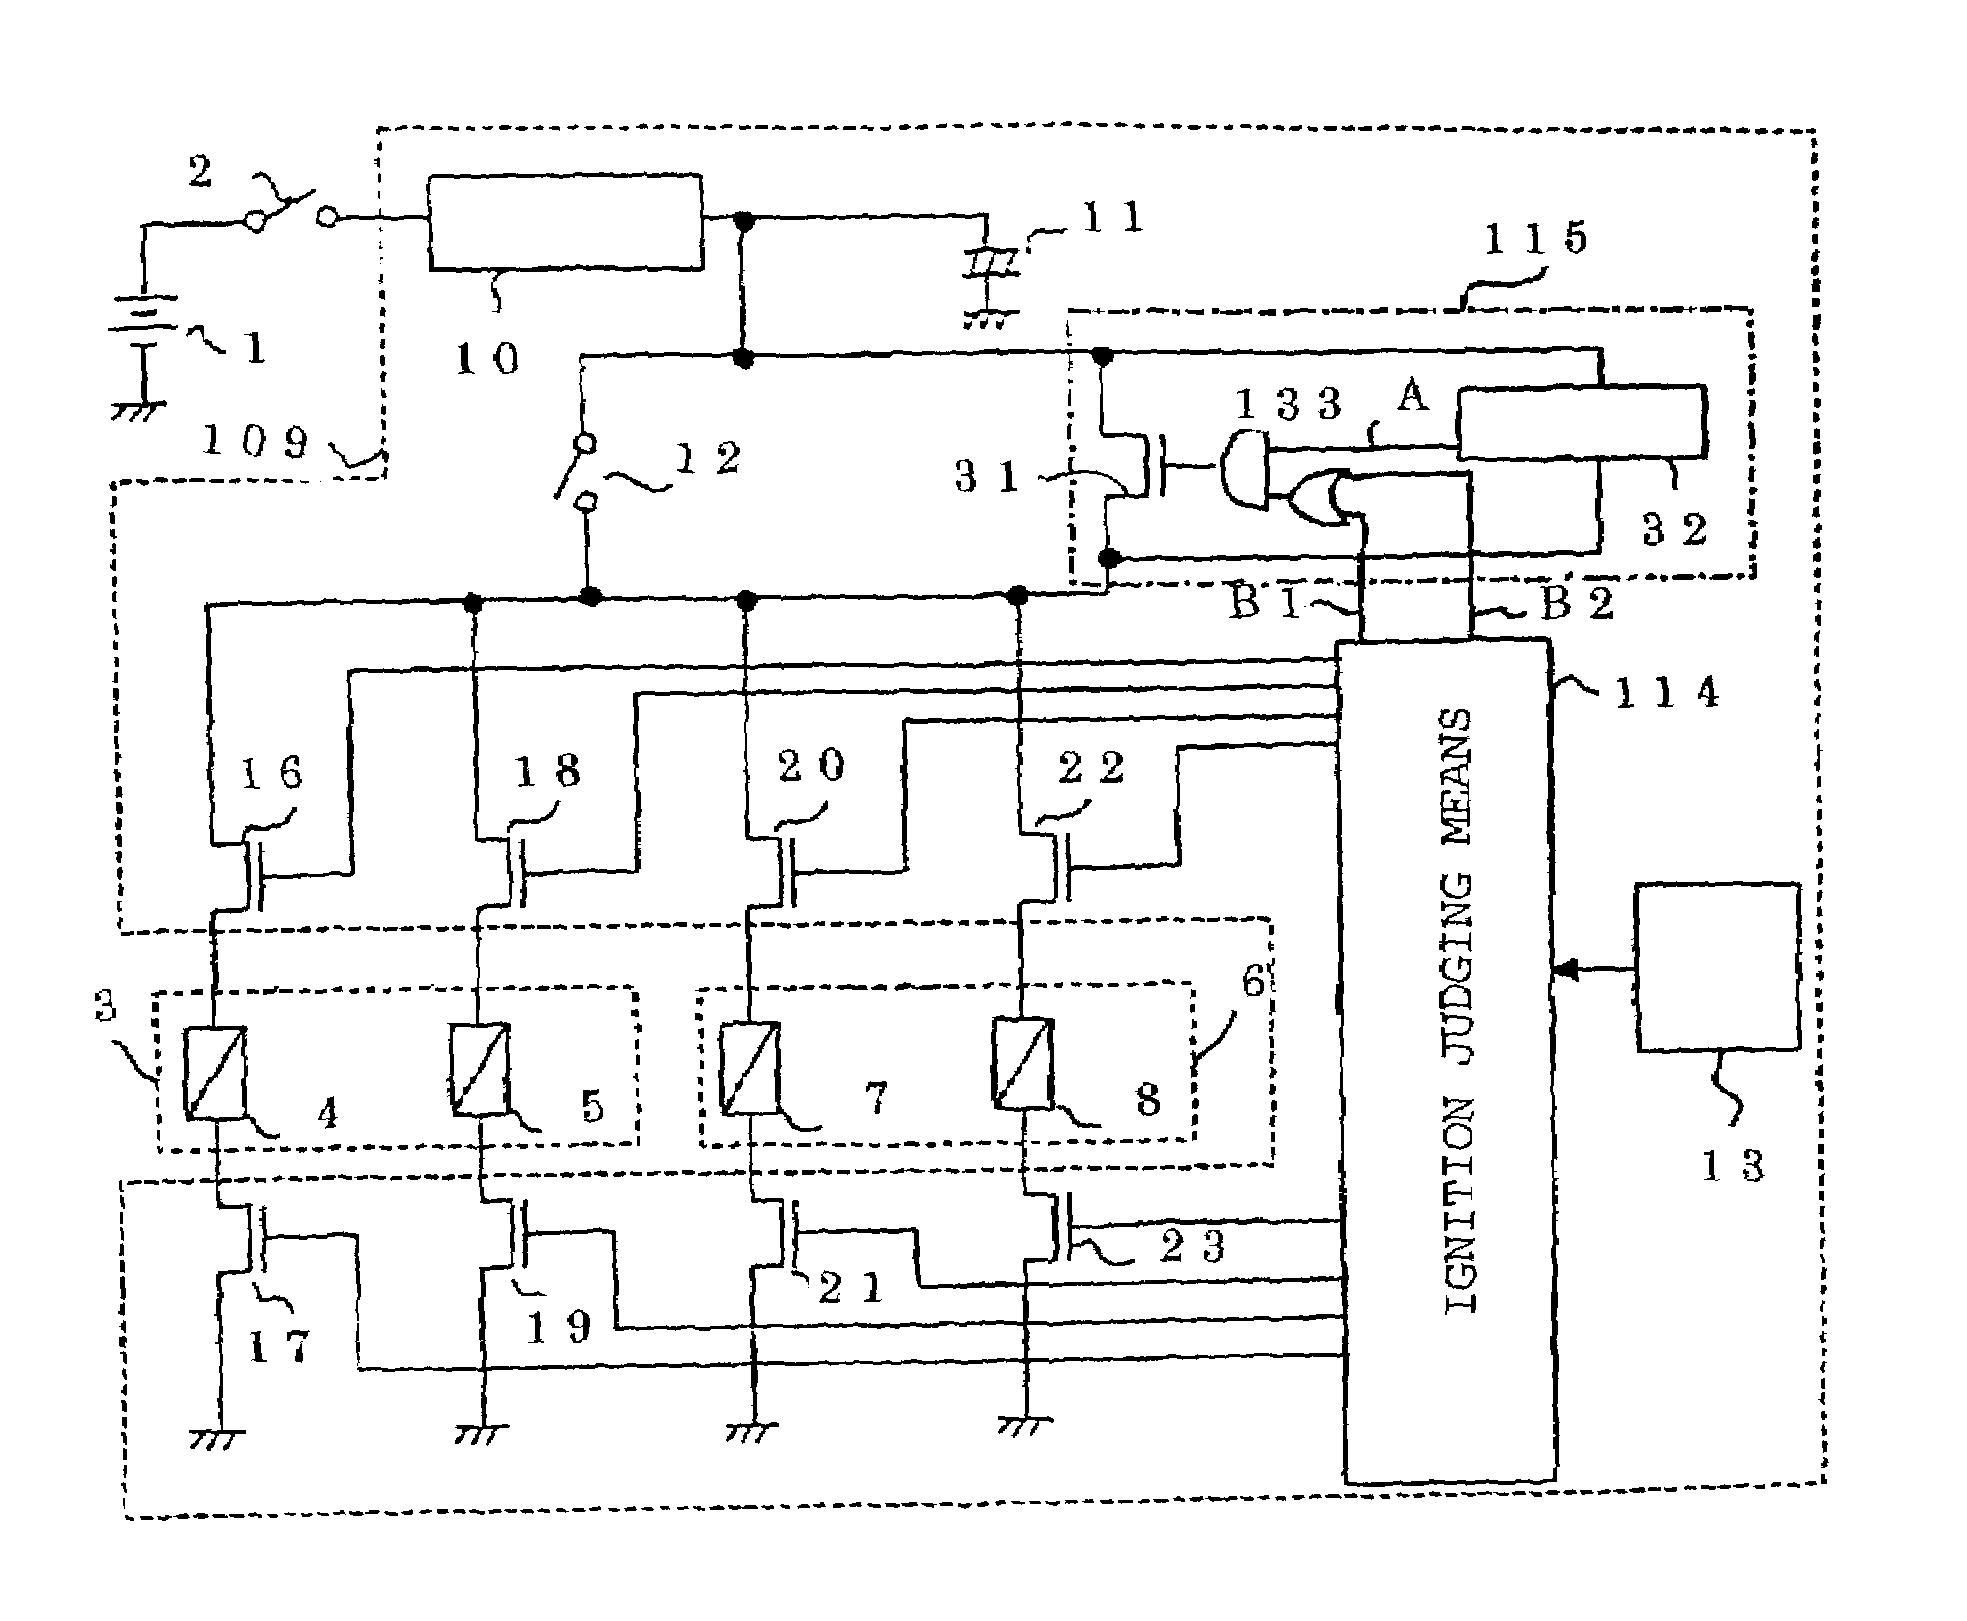 Air bag starter and backup circuit used therein